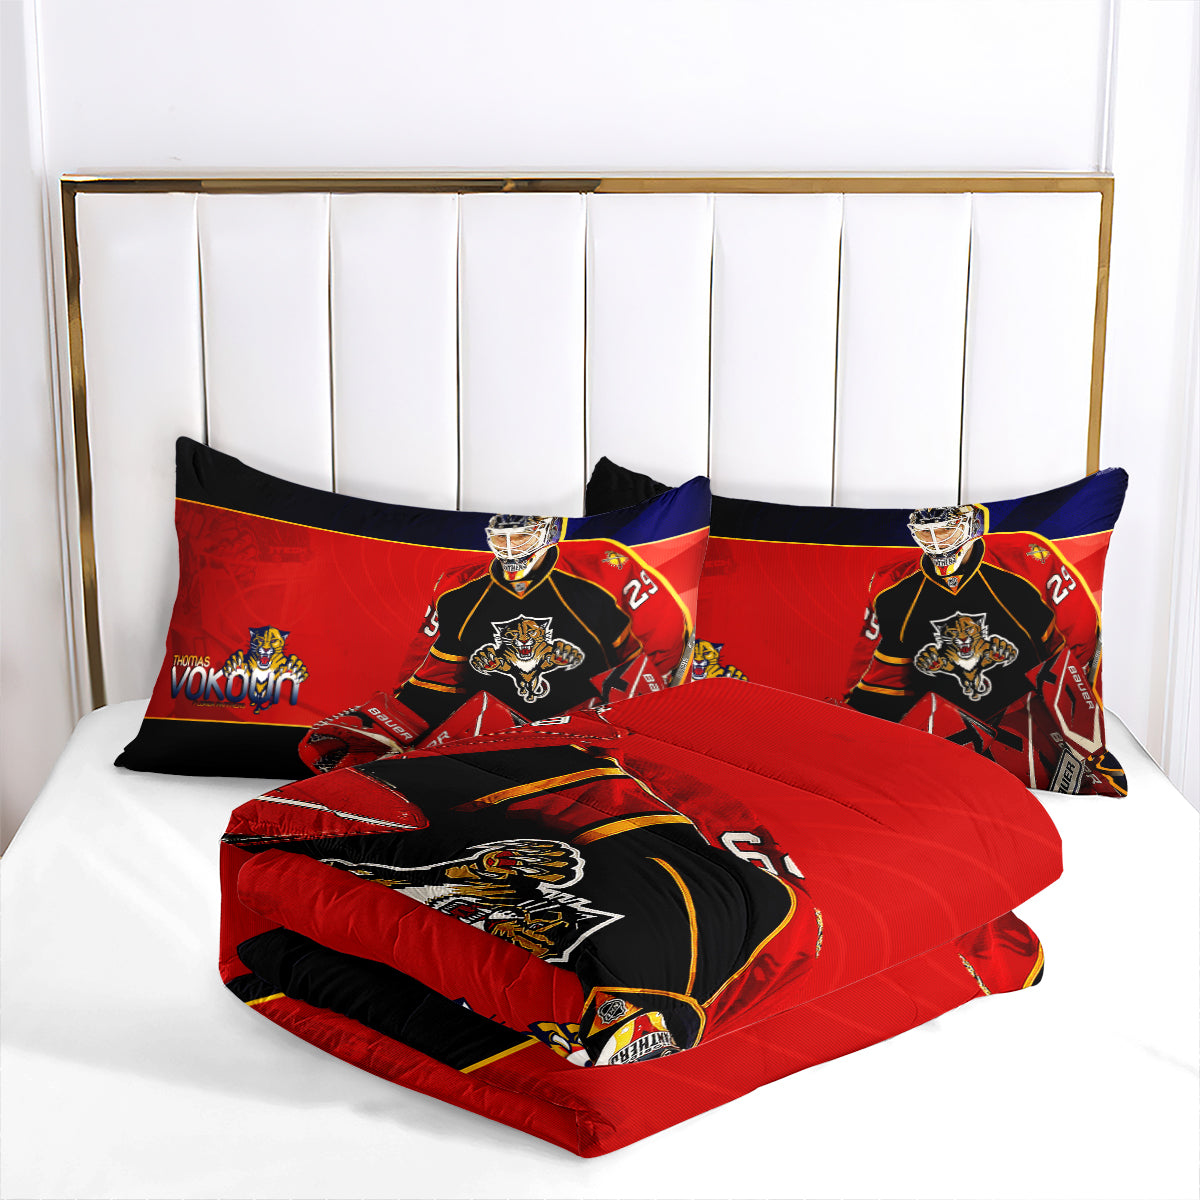 Florida Hockey Panthers Comforter Pillowcases 3PC Sets Blanket All Season Reversible Quilted Duvet